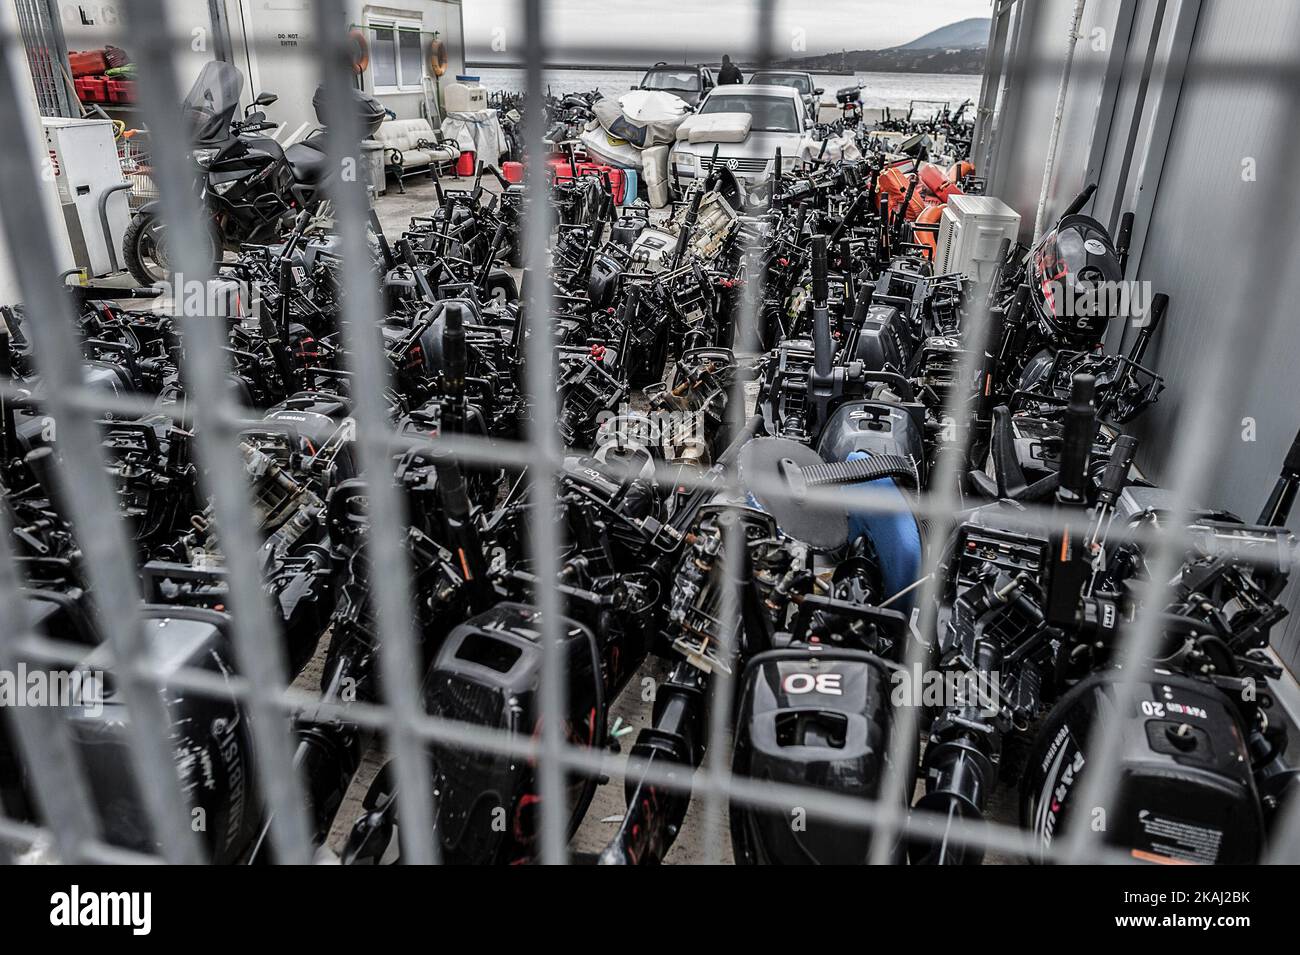 Motors of boats in Mytilene, island of Lesbos, Greece, on February 24, 2016. More than 110,000 migrants and refugees have crossed the Mediterranean to Greece and Italy so far this year, and 413 have lost their lives trying, the International Organization for Migration said on February 23, 2016.  Stock Photo